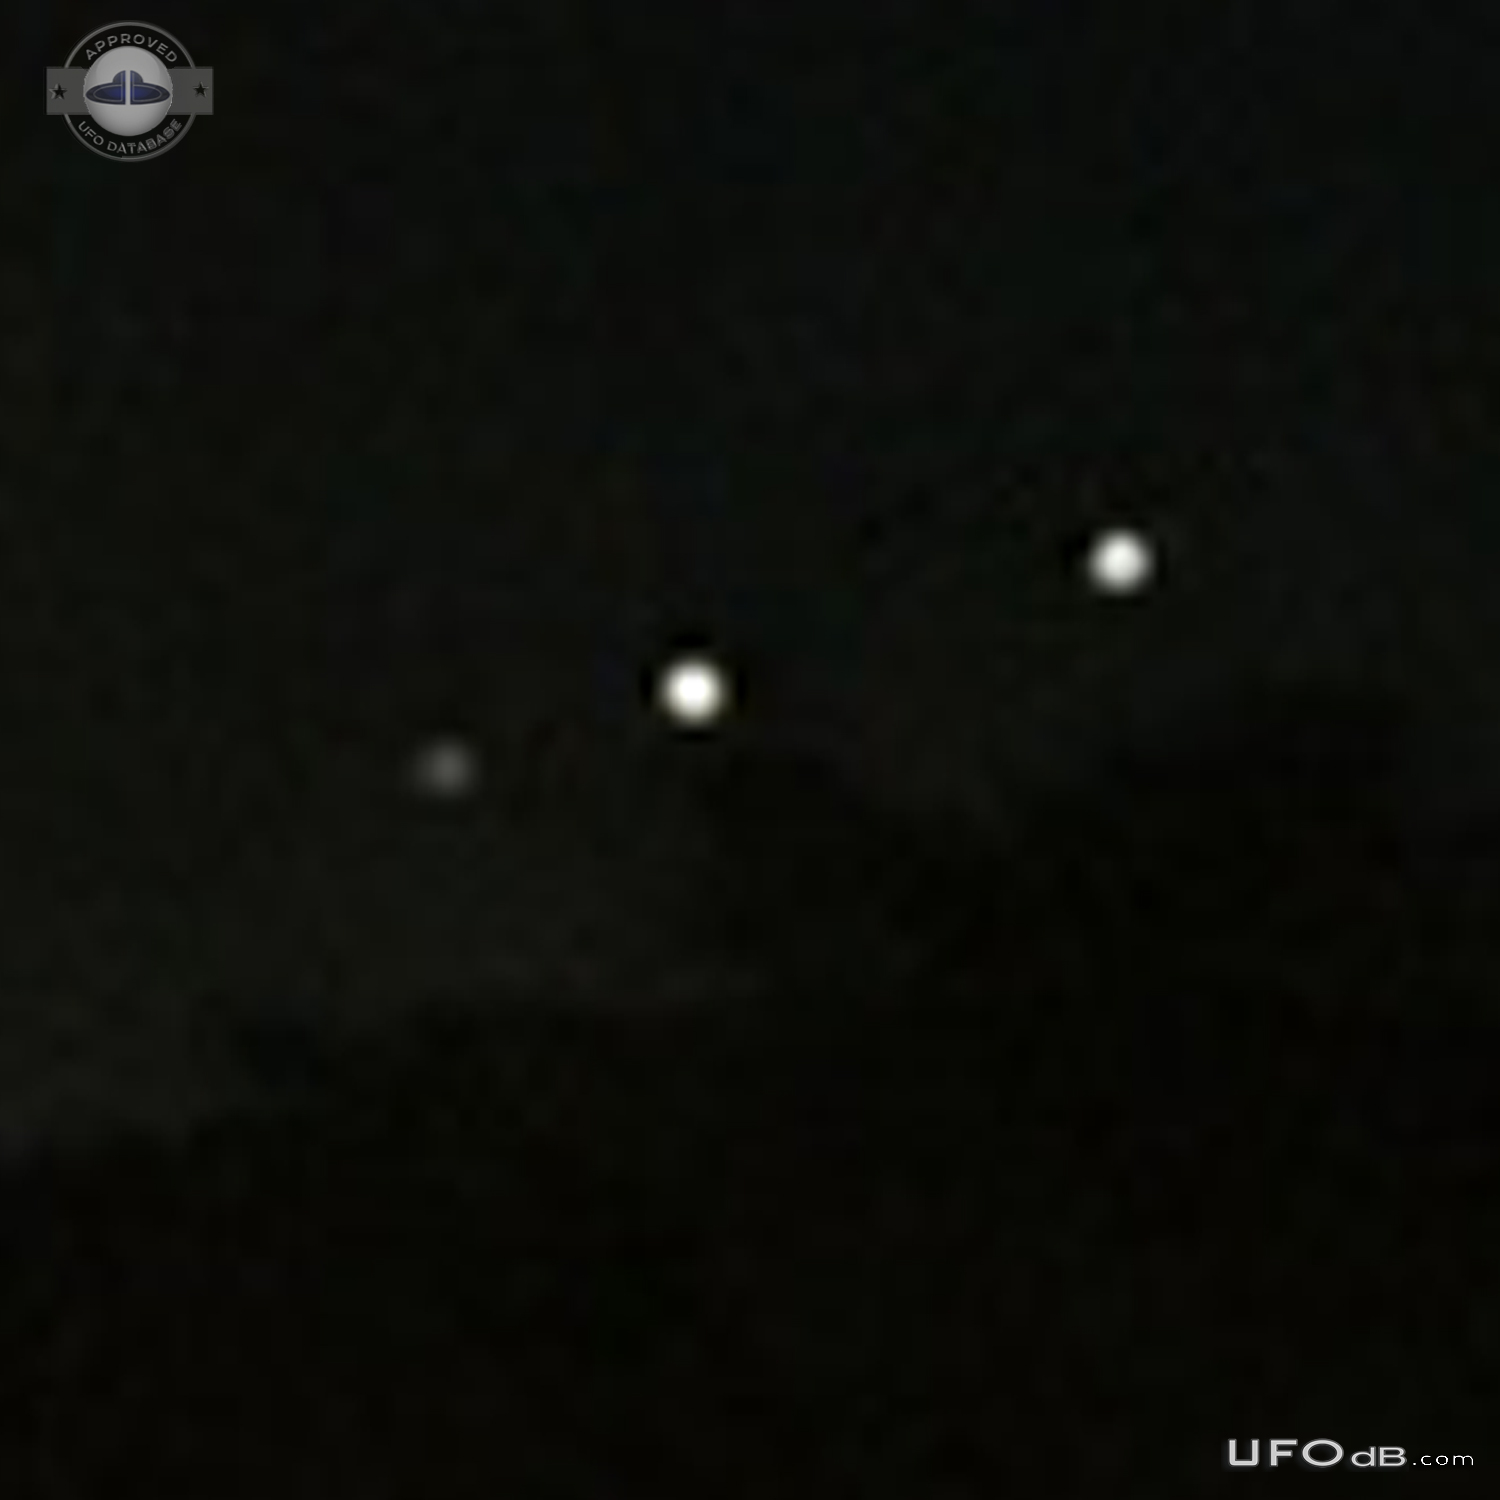 Perfect line of hovering UFOs low to ground - Hazelwood Missouri 2015 UFO Picture #737-6